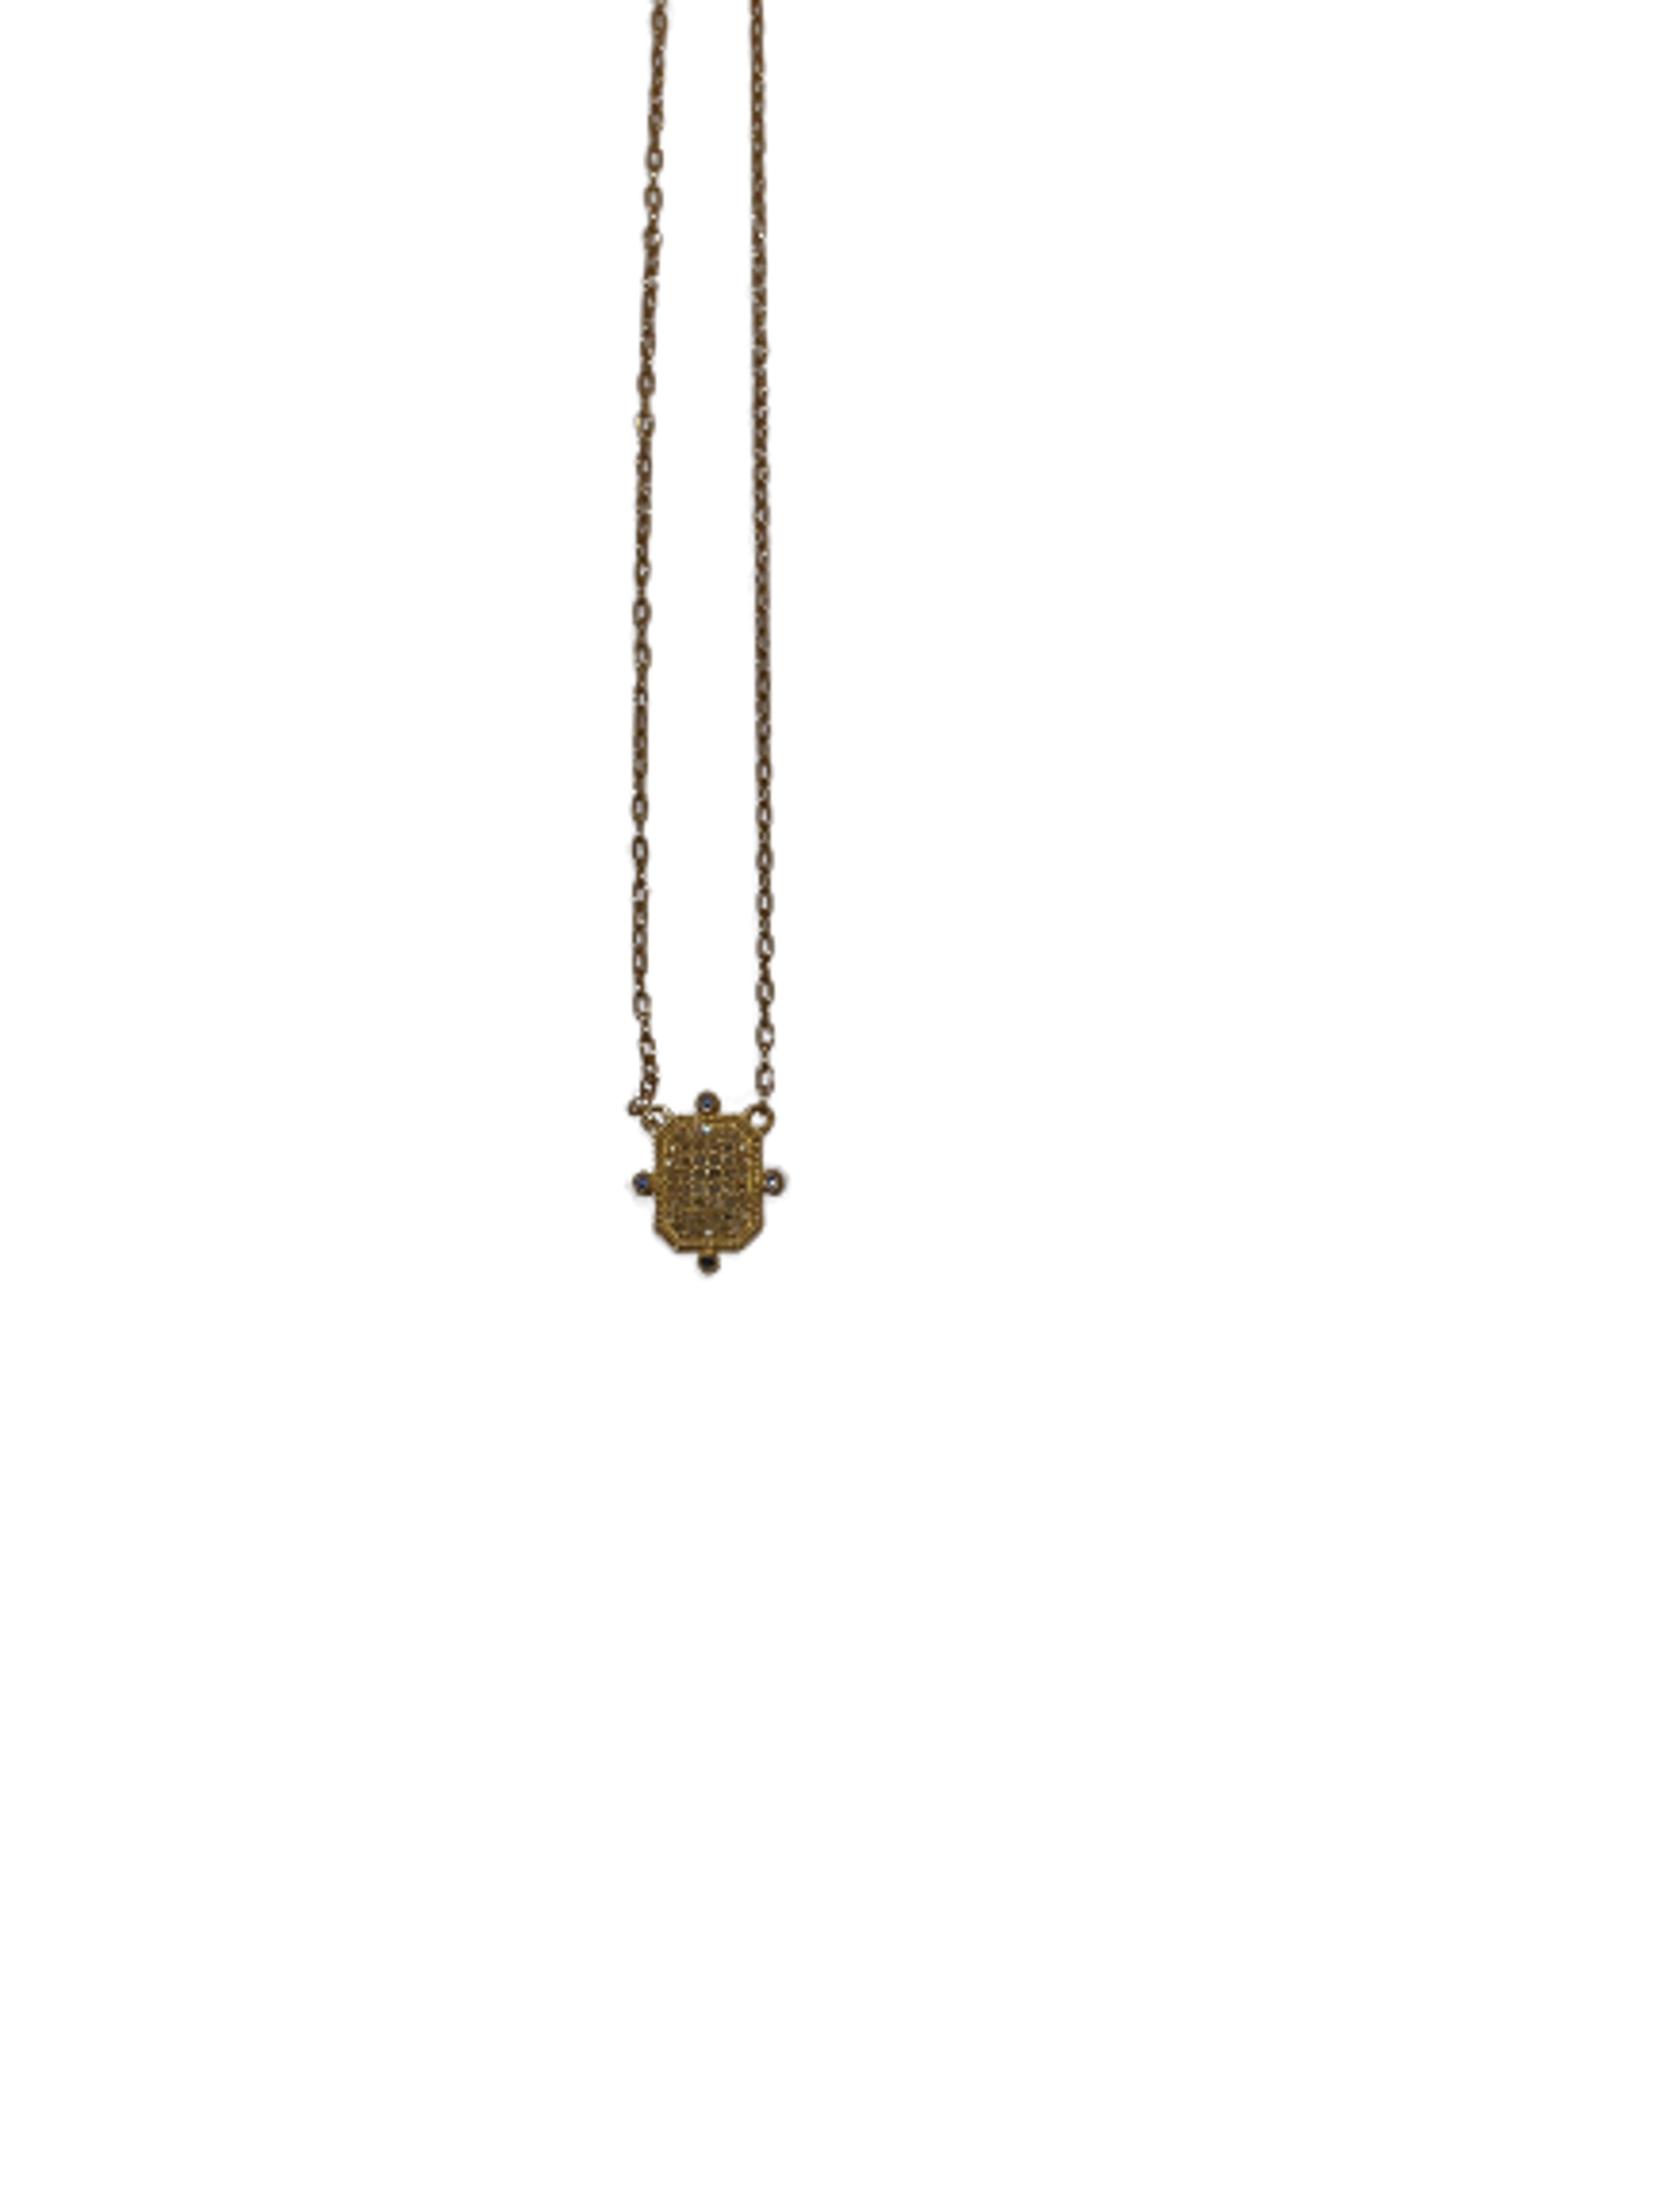 Gold Filled Delicate Necklace with Pave Diamond Rectangle Pendant Accented with Blue Sapphires by Karen Birchmier